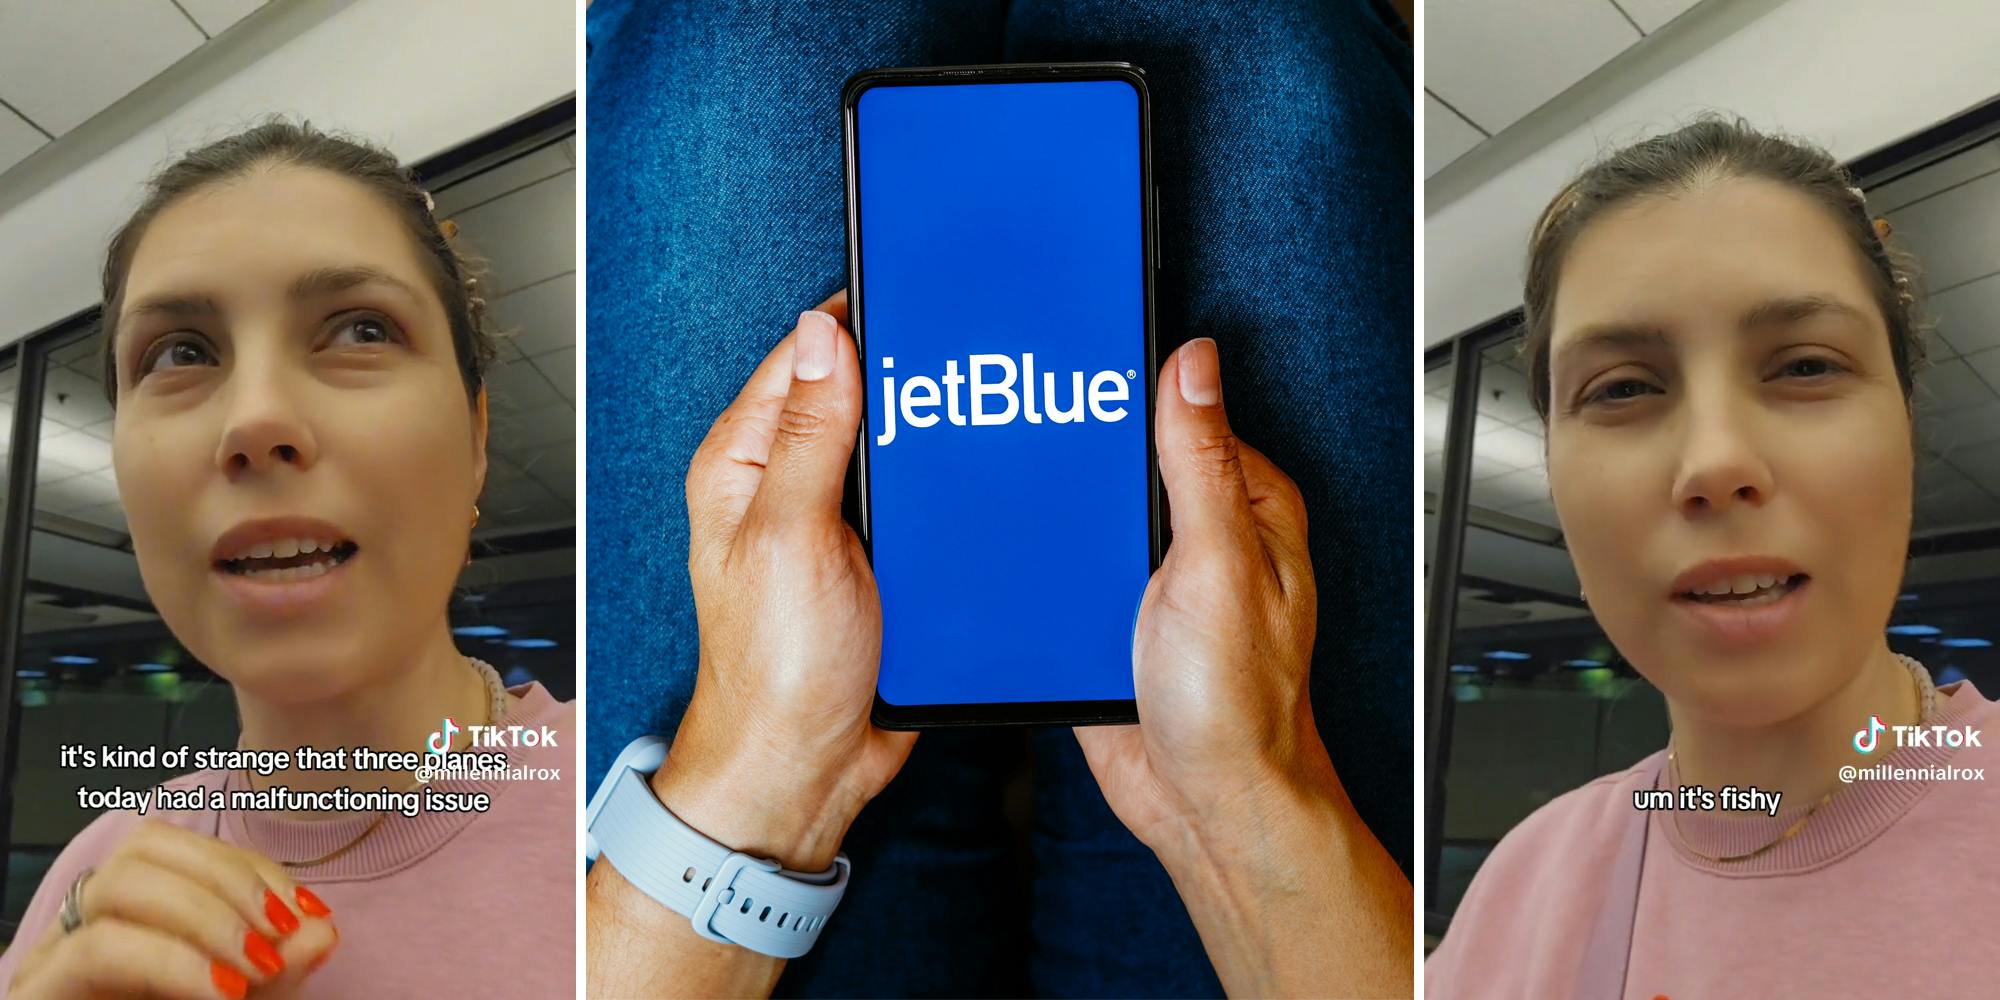 ‘It’s fishy’: JetBlue traveler says plane delayed because 80 TV screens are out—and 2 other flights had ‘malfunctioning’ issues. What’s going on?